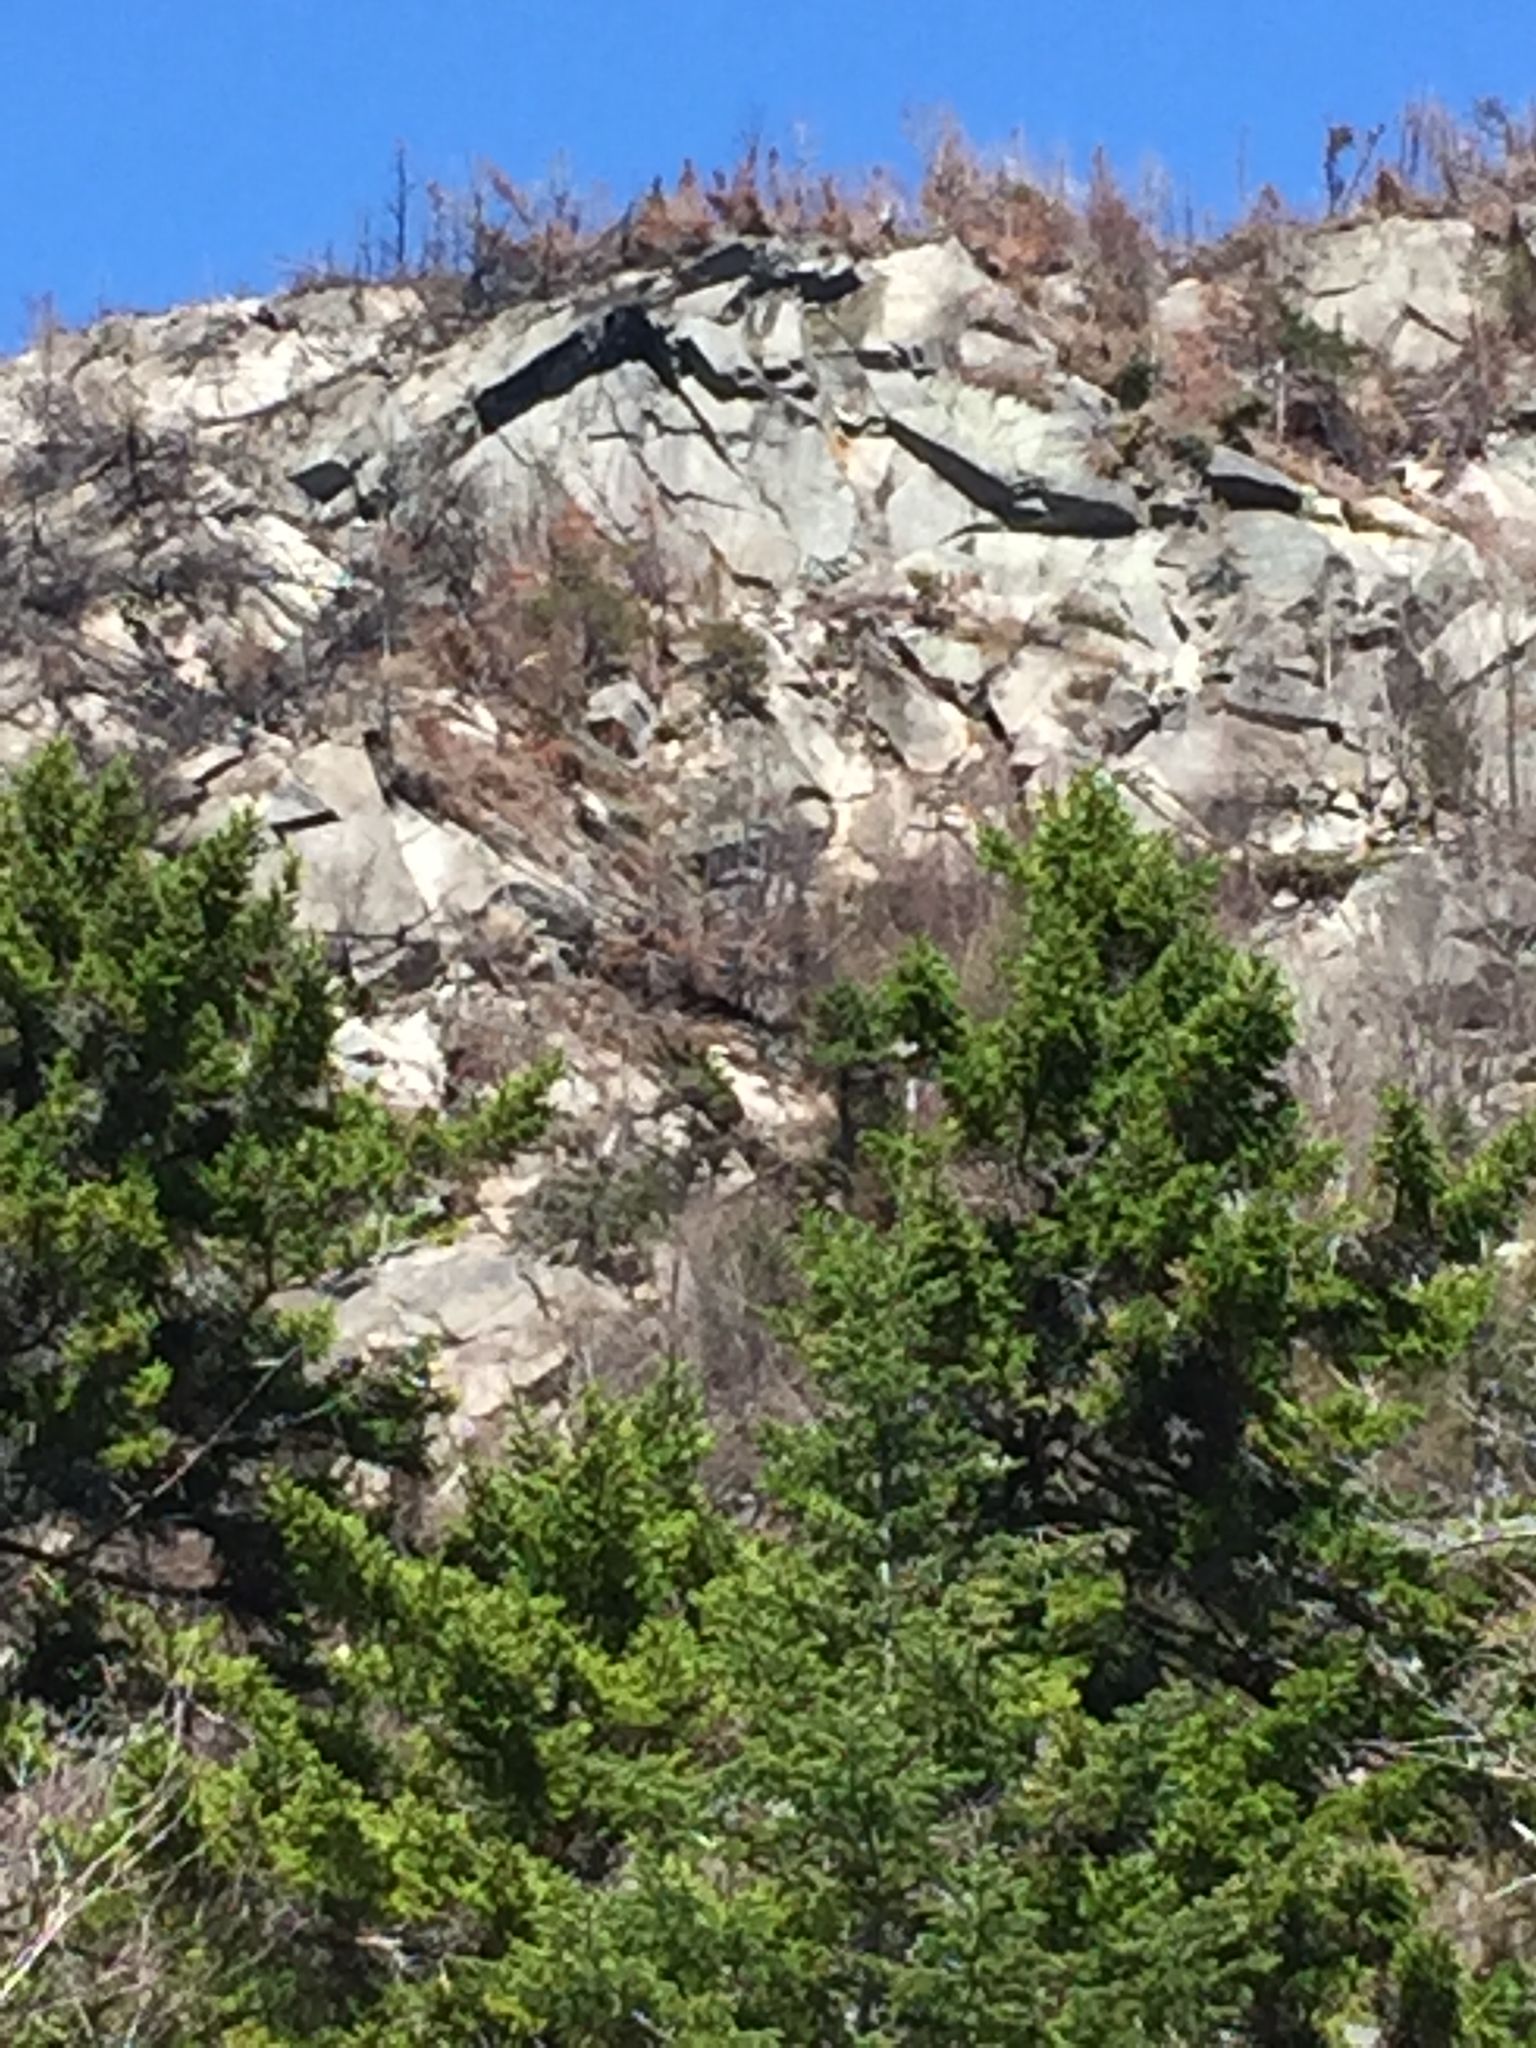 A view of the upper ledges of the Dilly Cliff, now scarred by a 2017 wildfire.